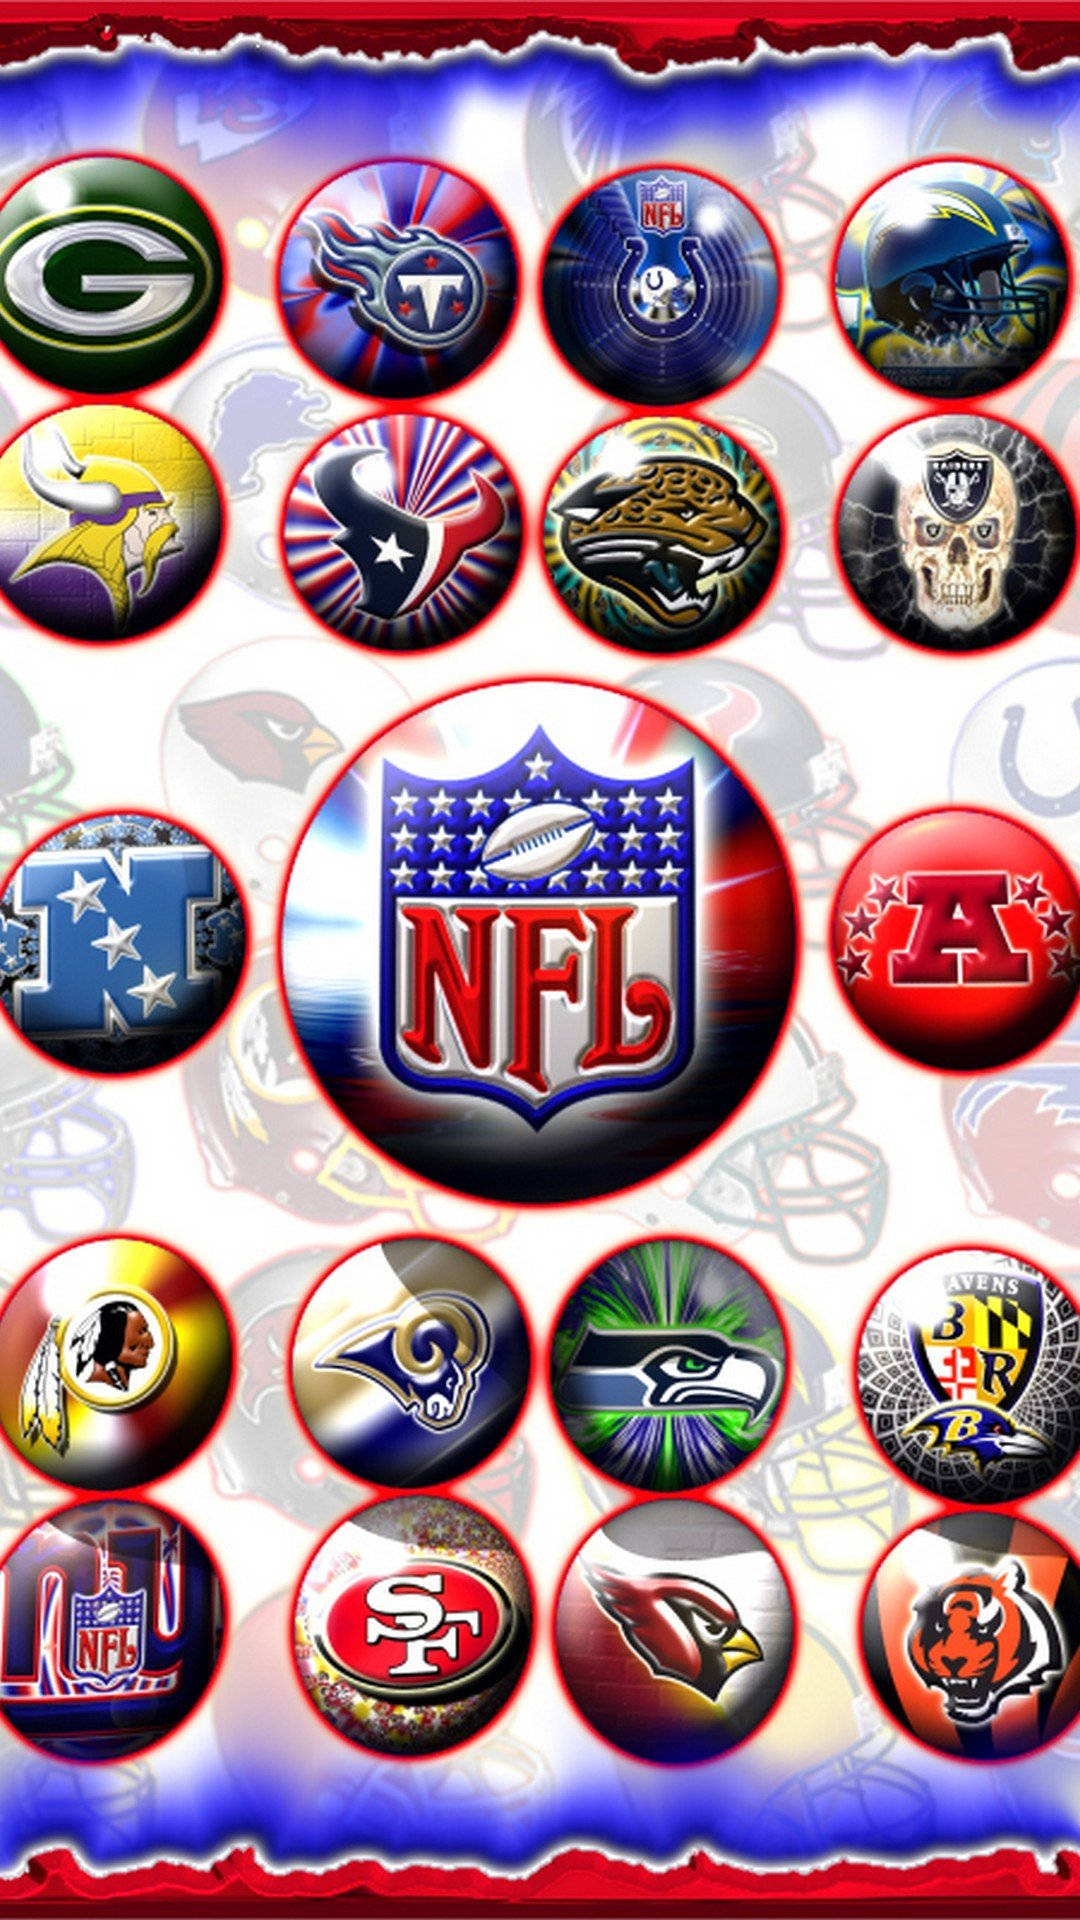 A Look At The Teams Competing In The Nfl Wallpaper